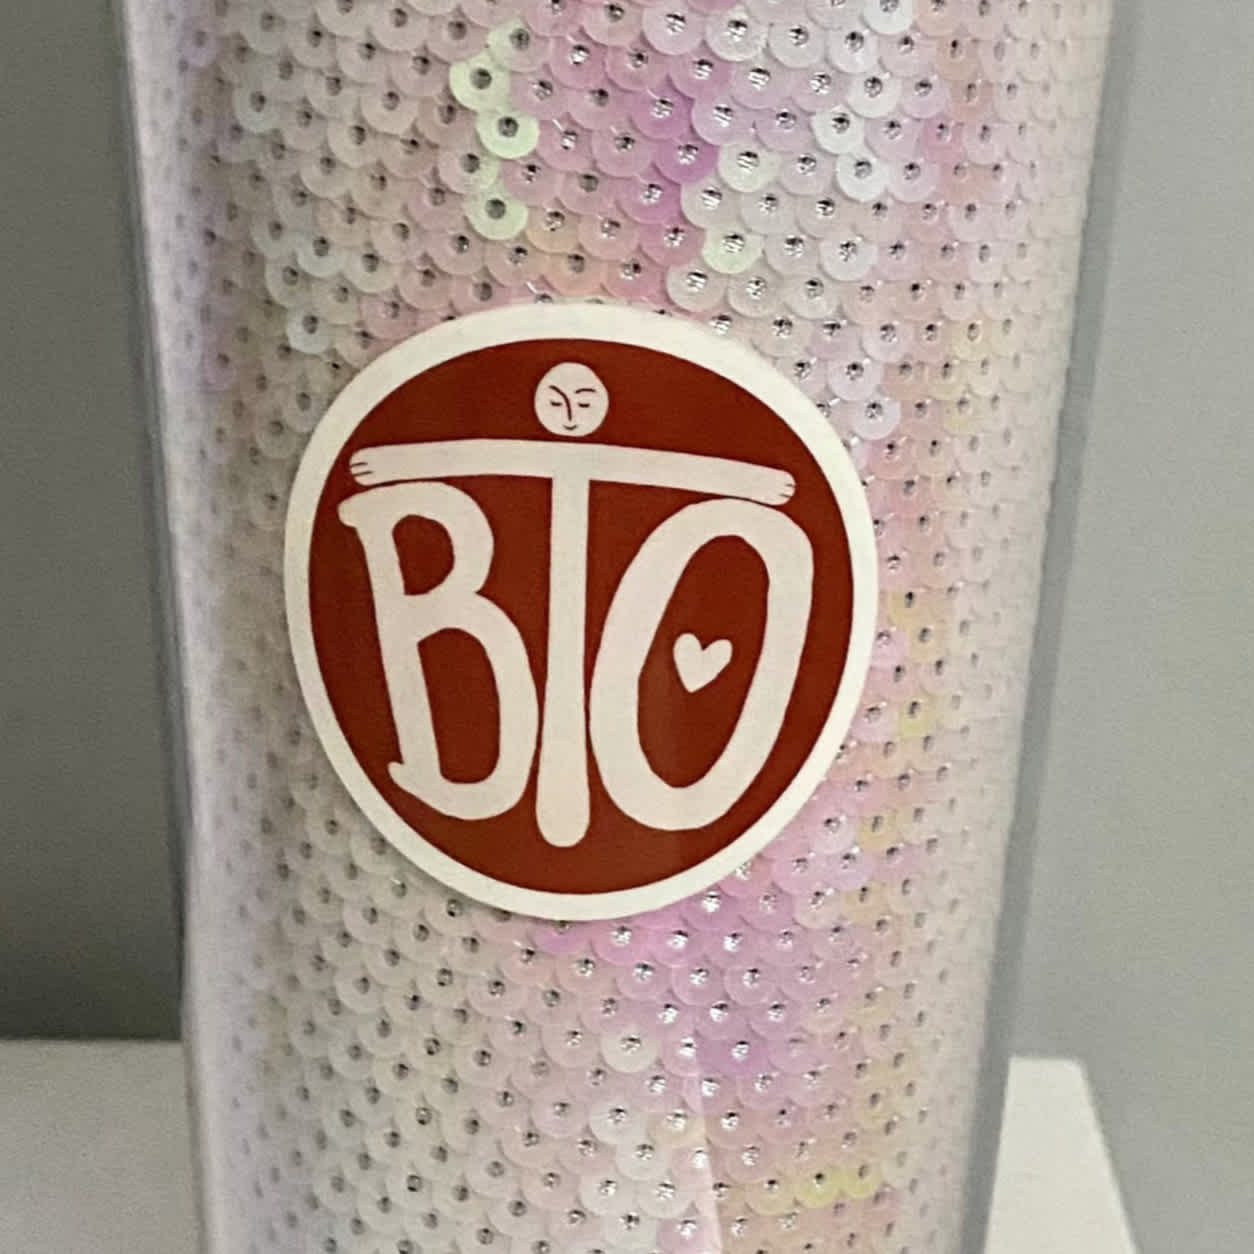 Image of Round sticker item, showing sticker on cup in centre.